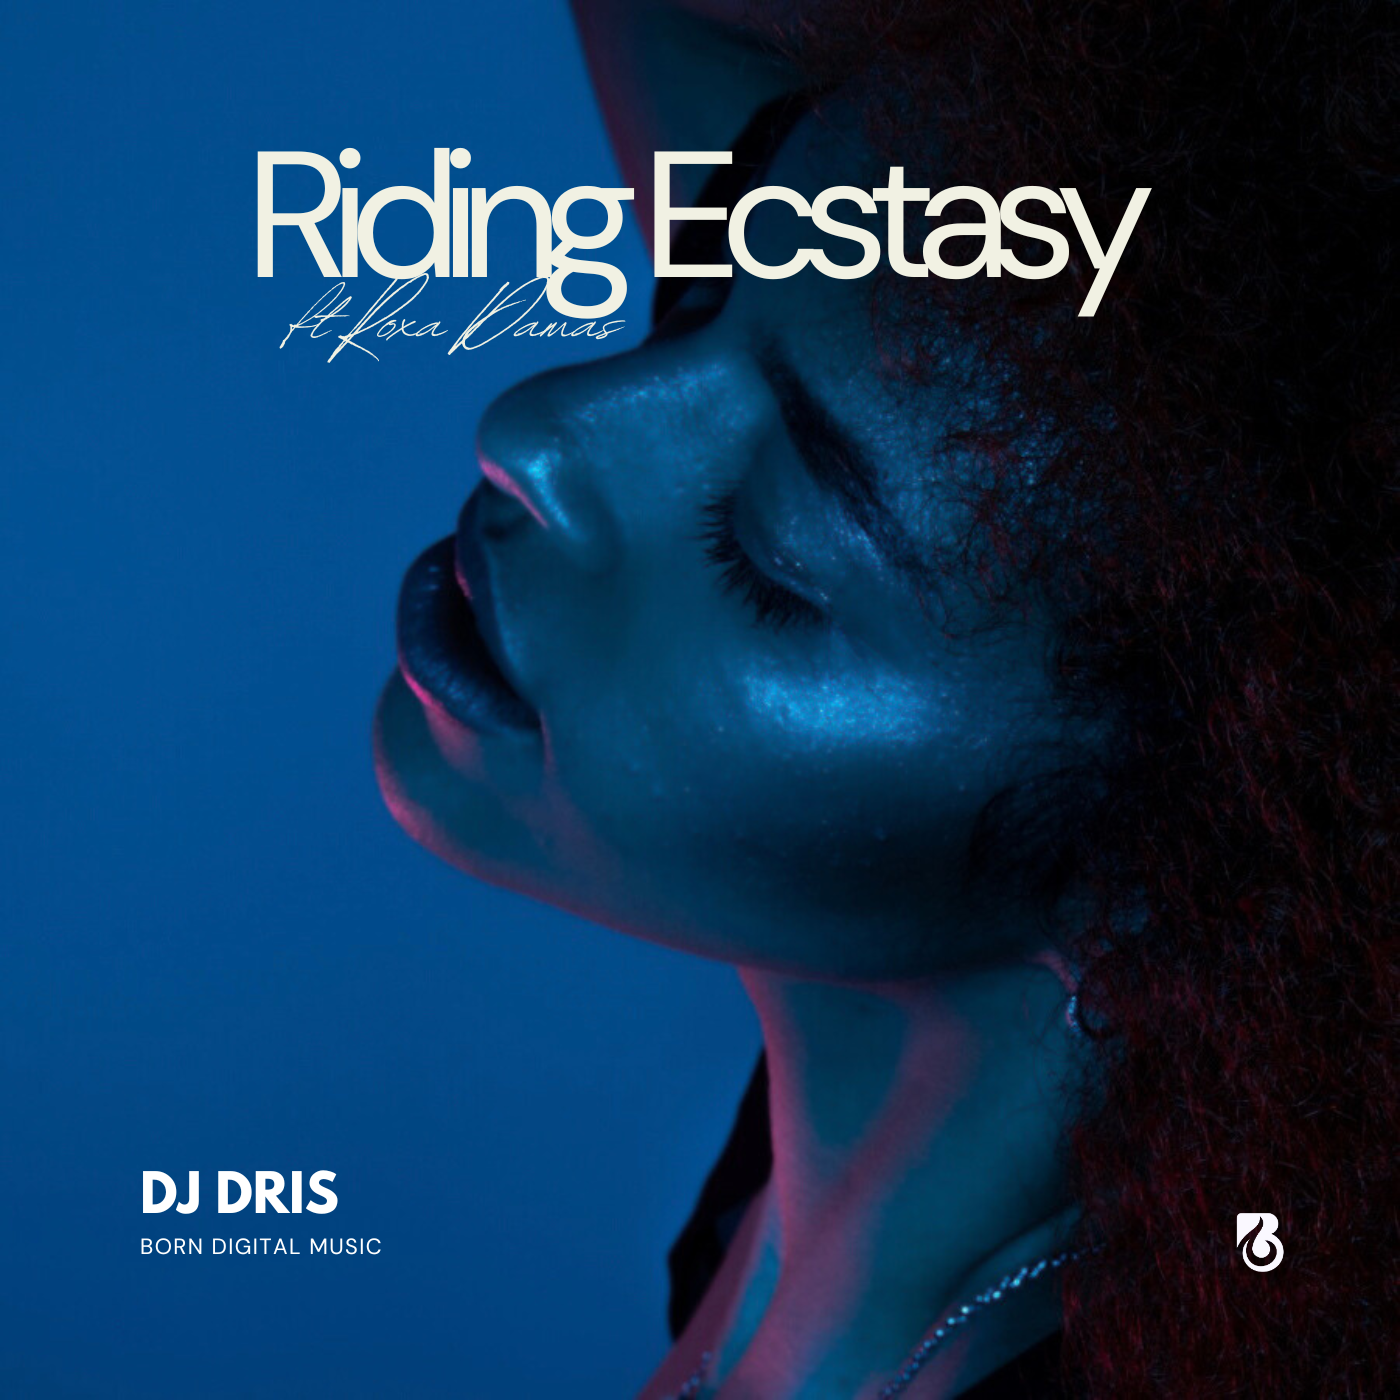 DJ Dris Continues to Showcase Impressive Abilities with the Release of 'Riding Ecstasy'